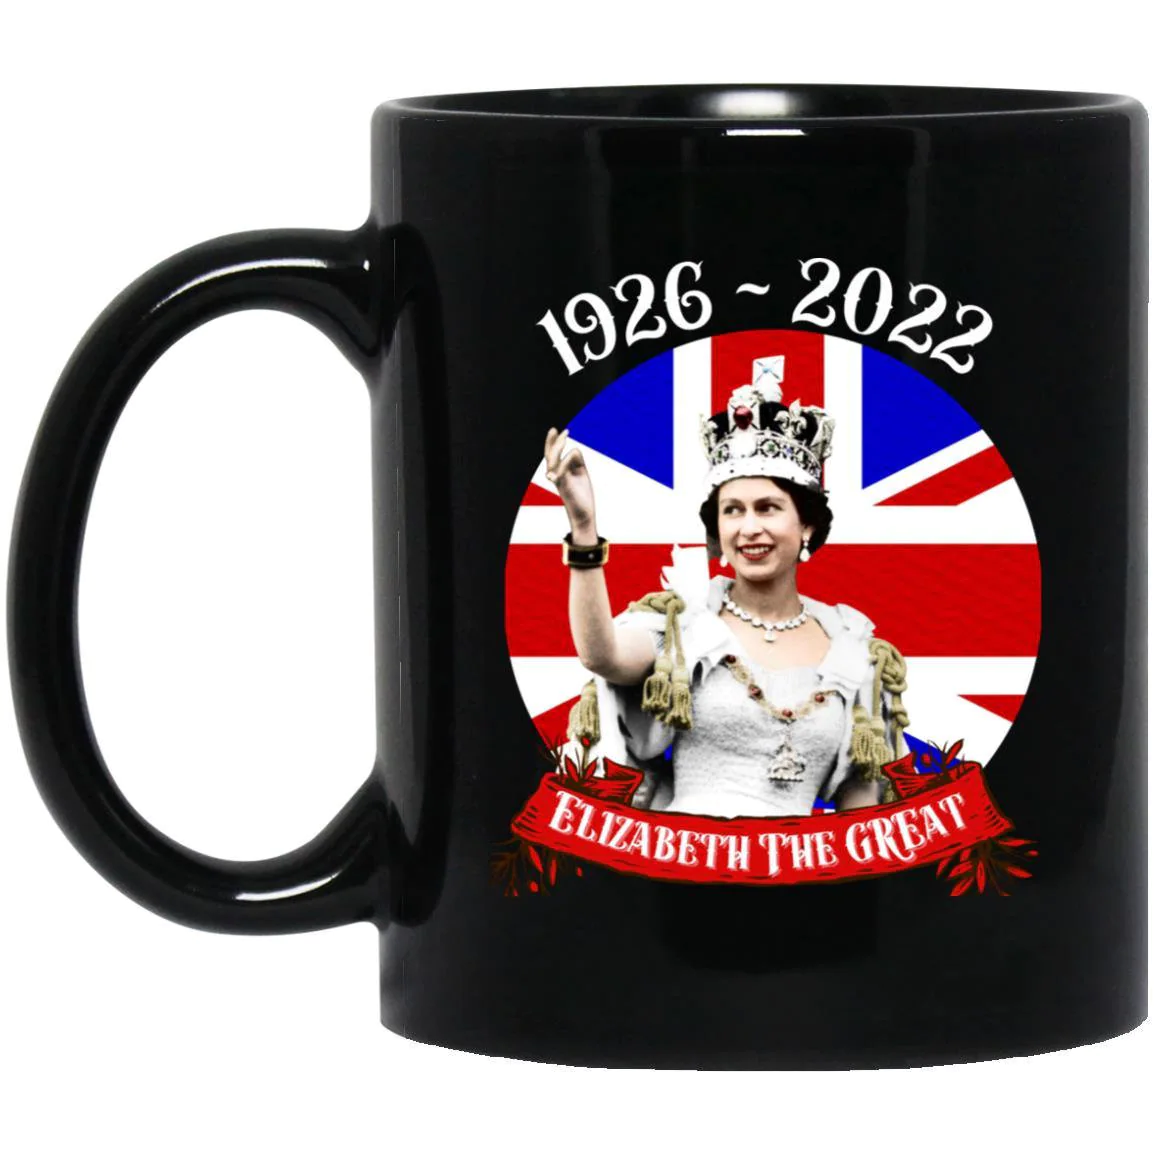 The Great 1926-2022 Her Majesty The In Memoriam Long Live The Uk Black Coffee Mug Rip Queen Elizabeth Ii